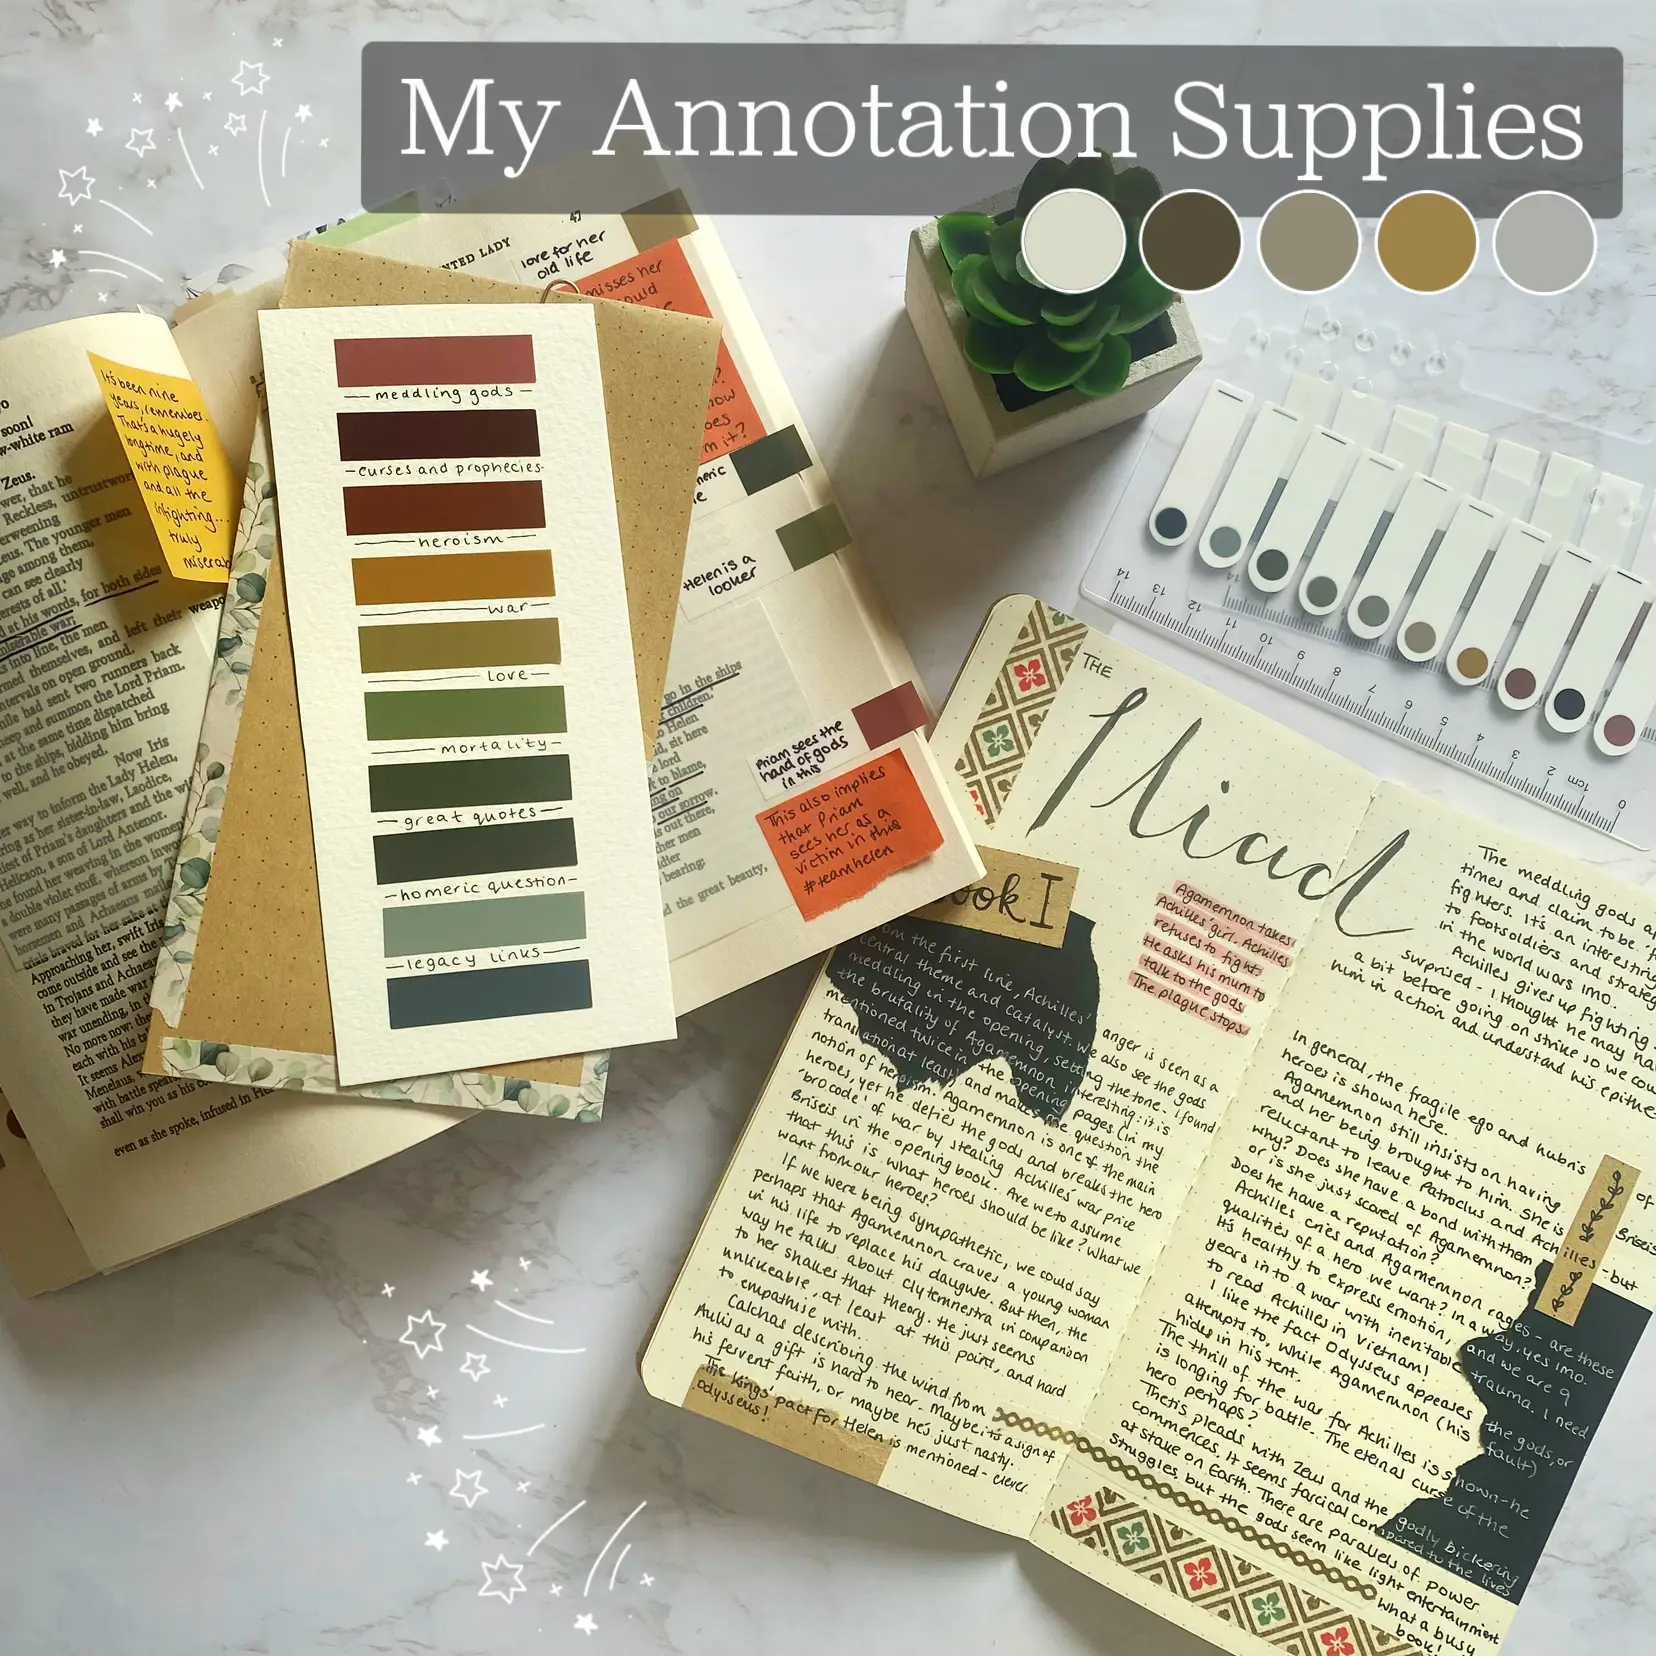 My Annotation Supplies, Gallery posted by LiteraryOdyssey